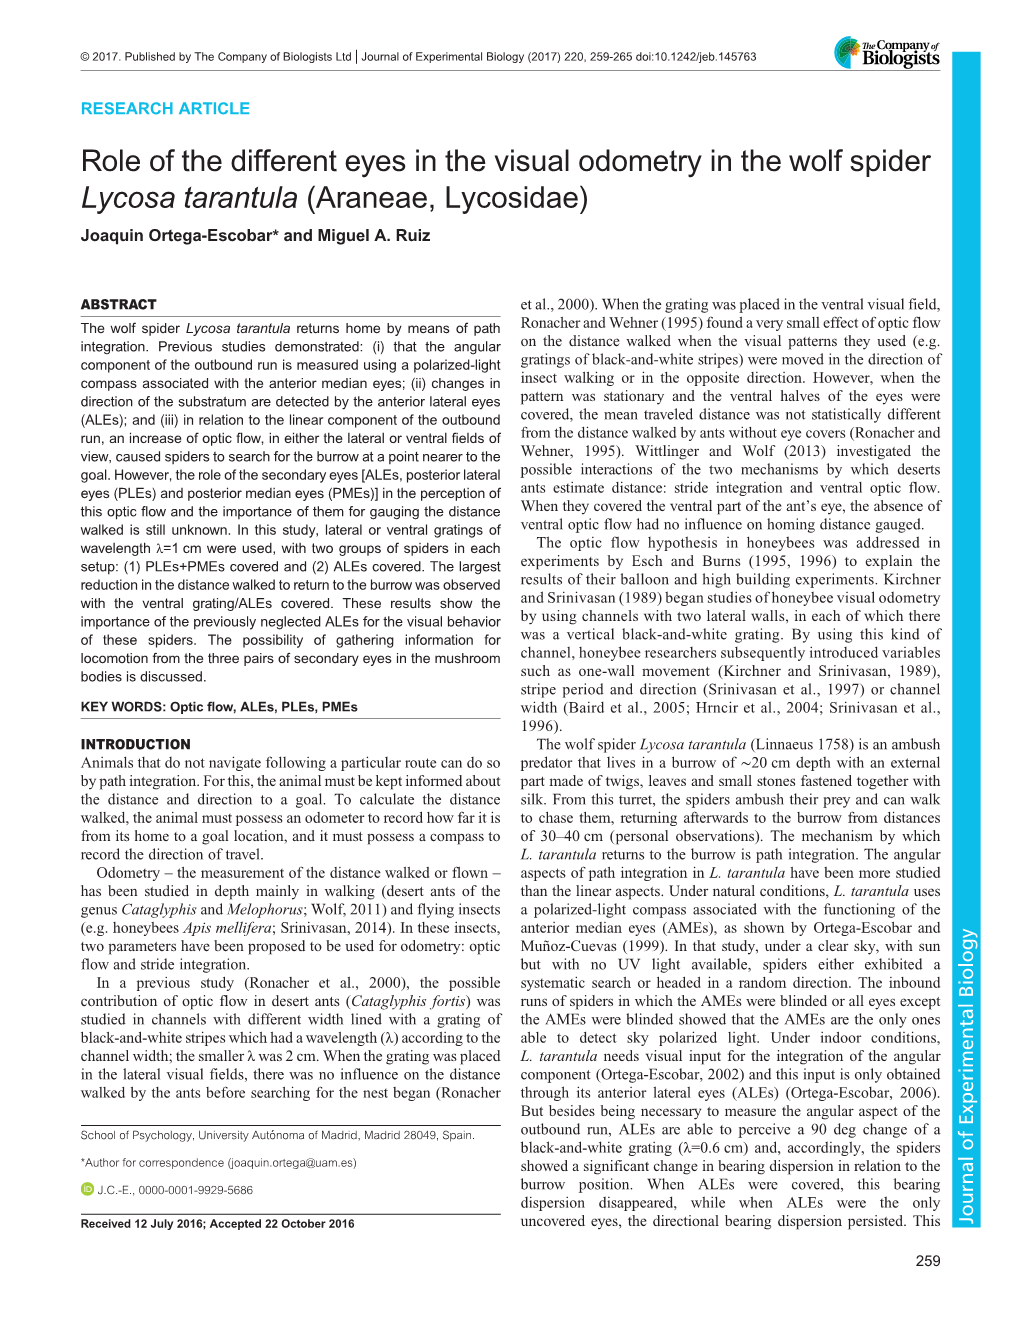 Role of the Different Eyes in the Visual Odometry in the Wolf Spider Lycosa Tarantula (Araneae, Lycosidae) Joaquin Ortega-Escobar* and Miguel A